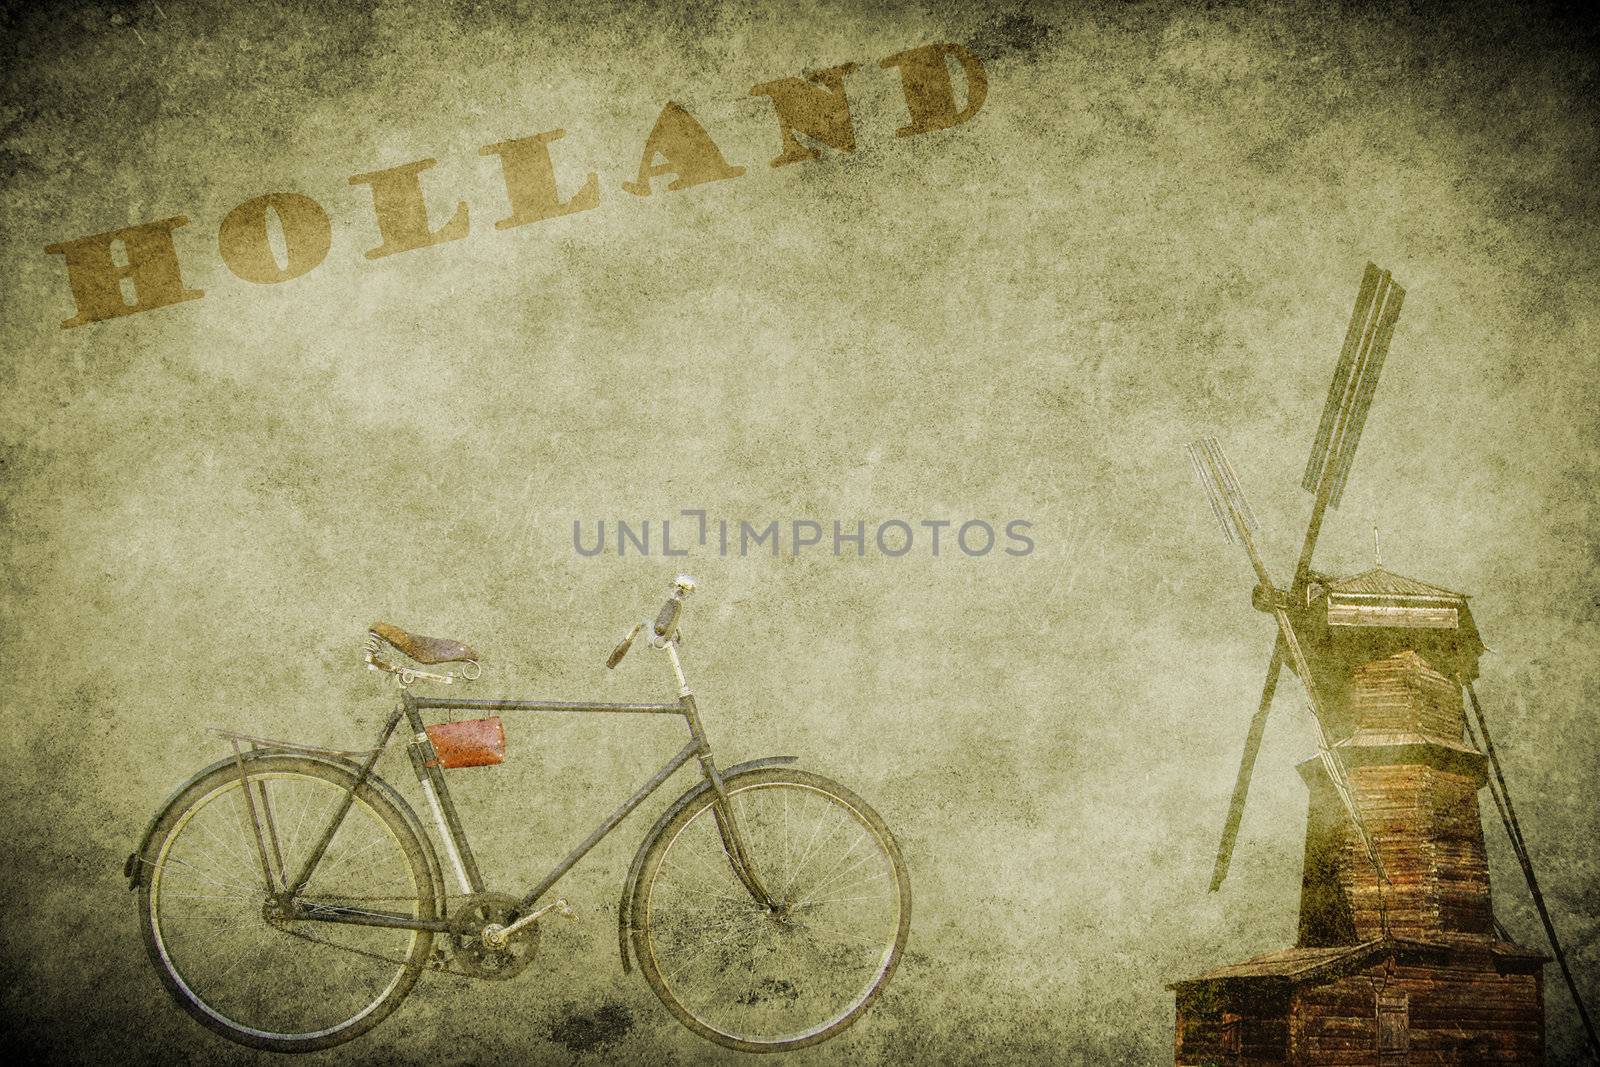 The old windmill and bicycle on the old brown paper